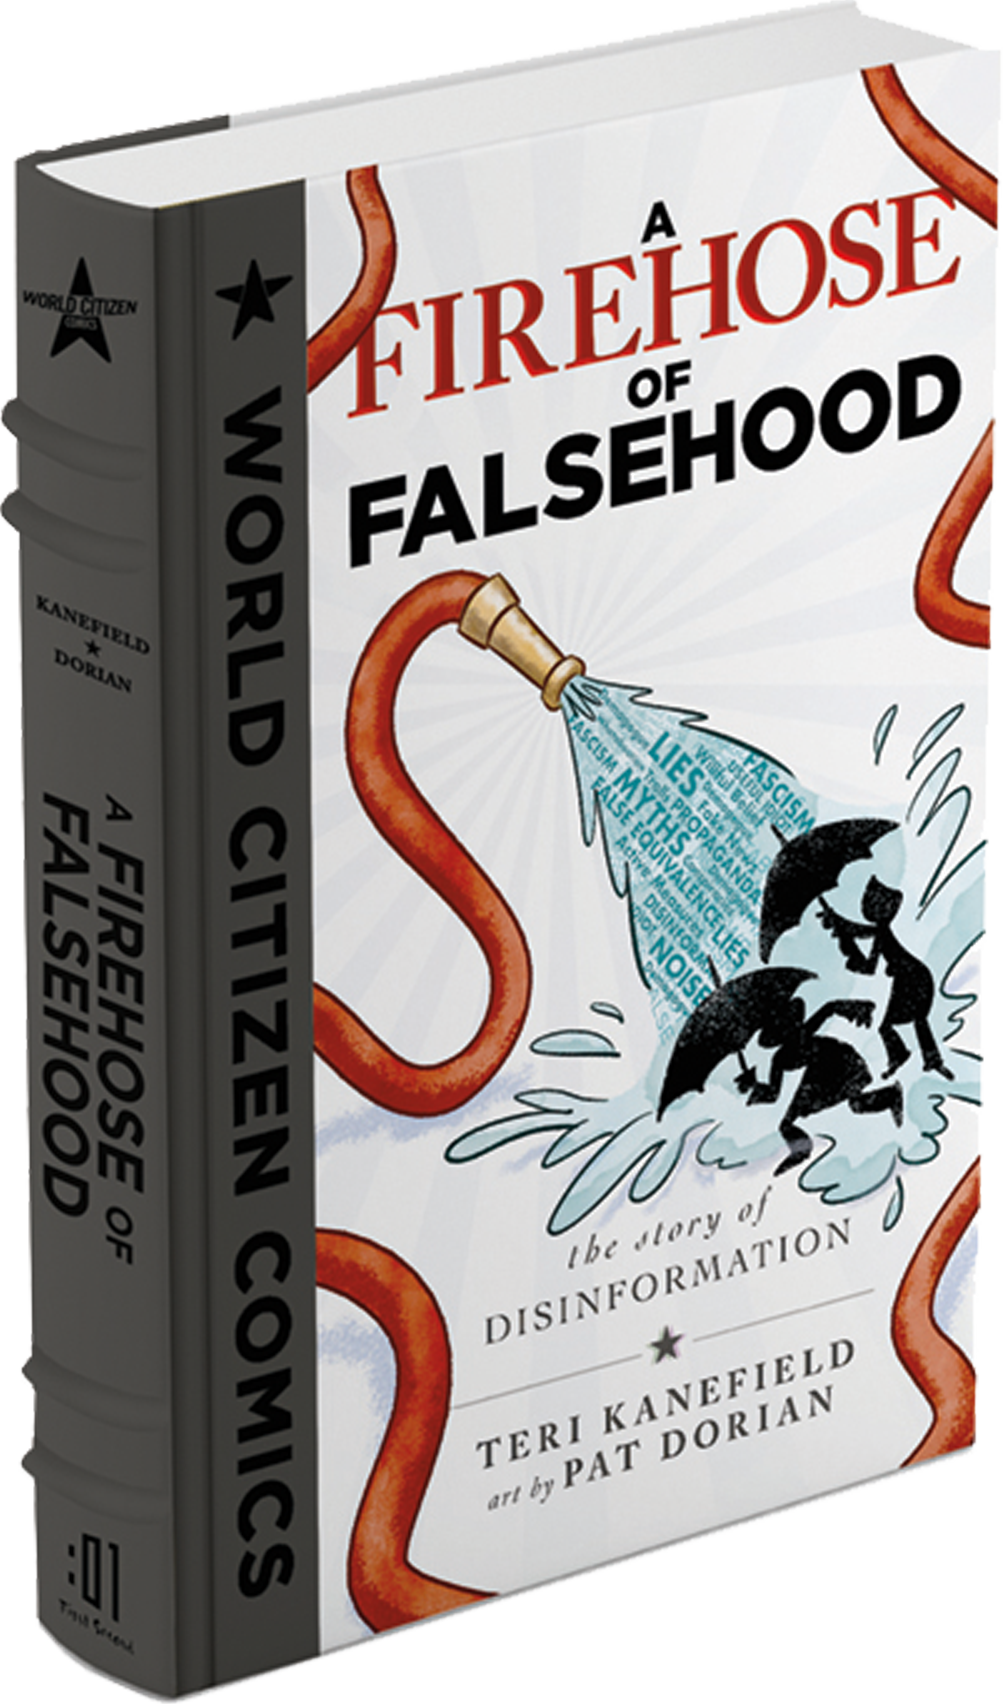 A Firehose of Falsehood: The Story of Disinformation